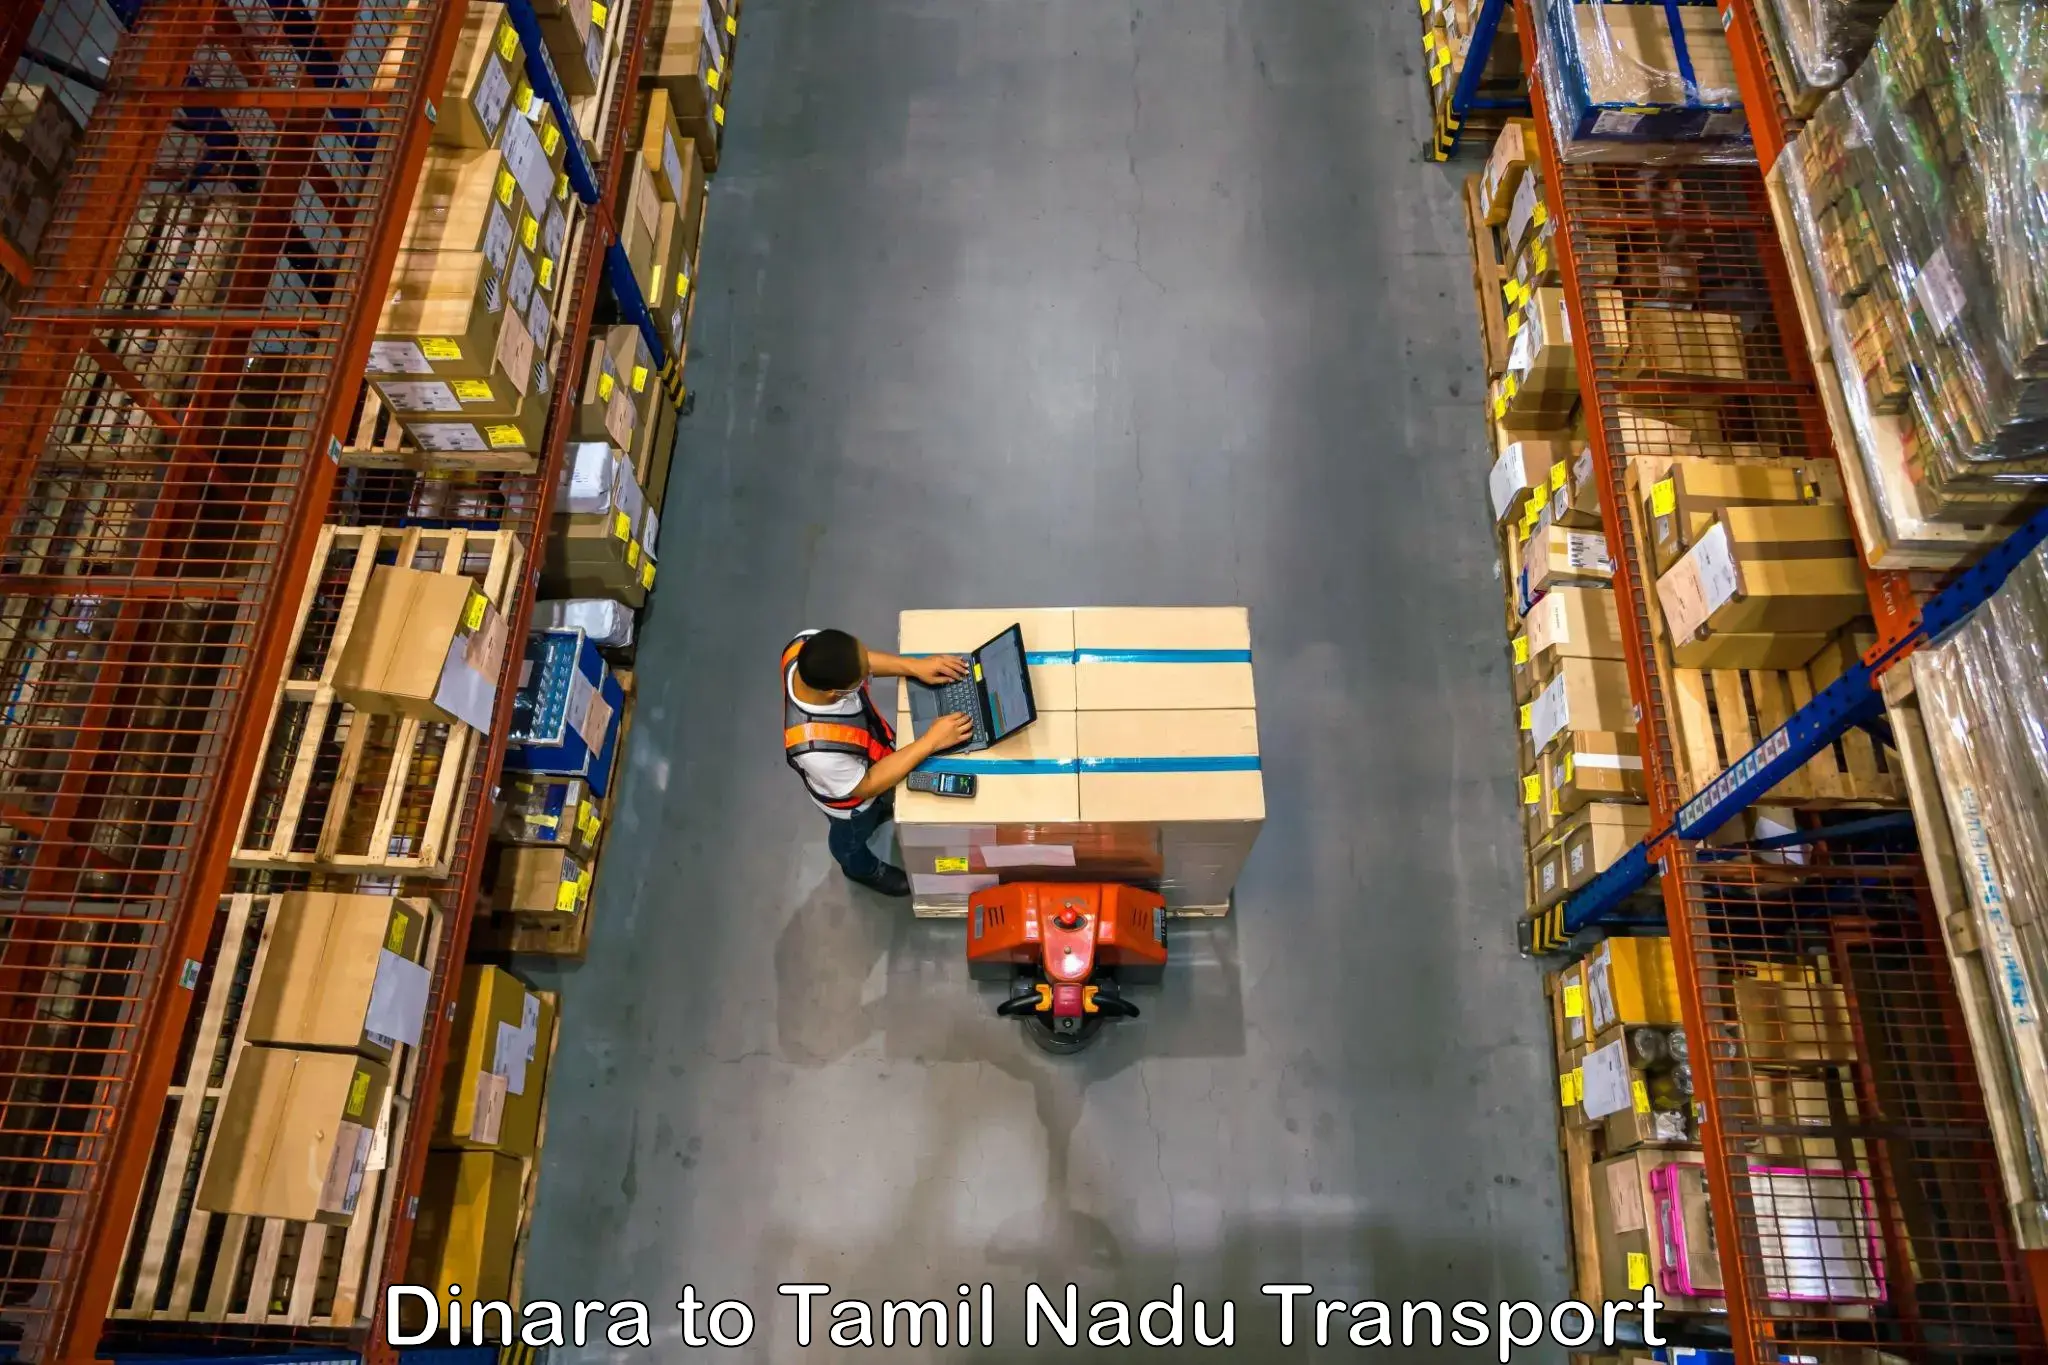 Daily parcel service transport Dinara to Shanmugha Arts Science Technology and Research Academy Thanjavur